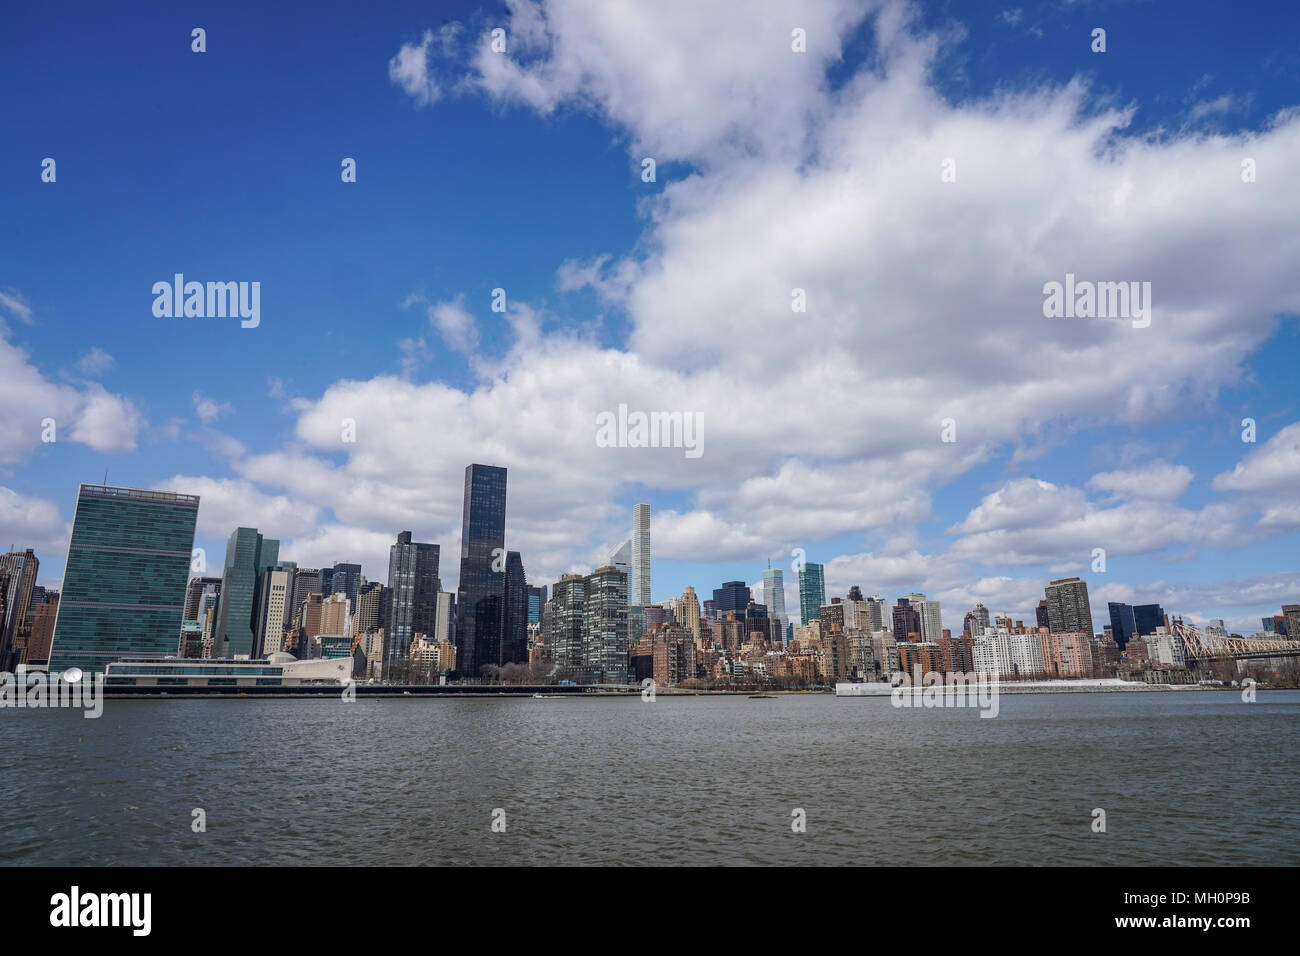 A general view of New York City in the United States. From a series of travel photos in the United States. Photo date: Thursday, April 5, 2018. Photo: Stock Photo